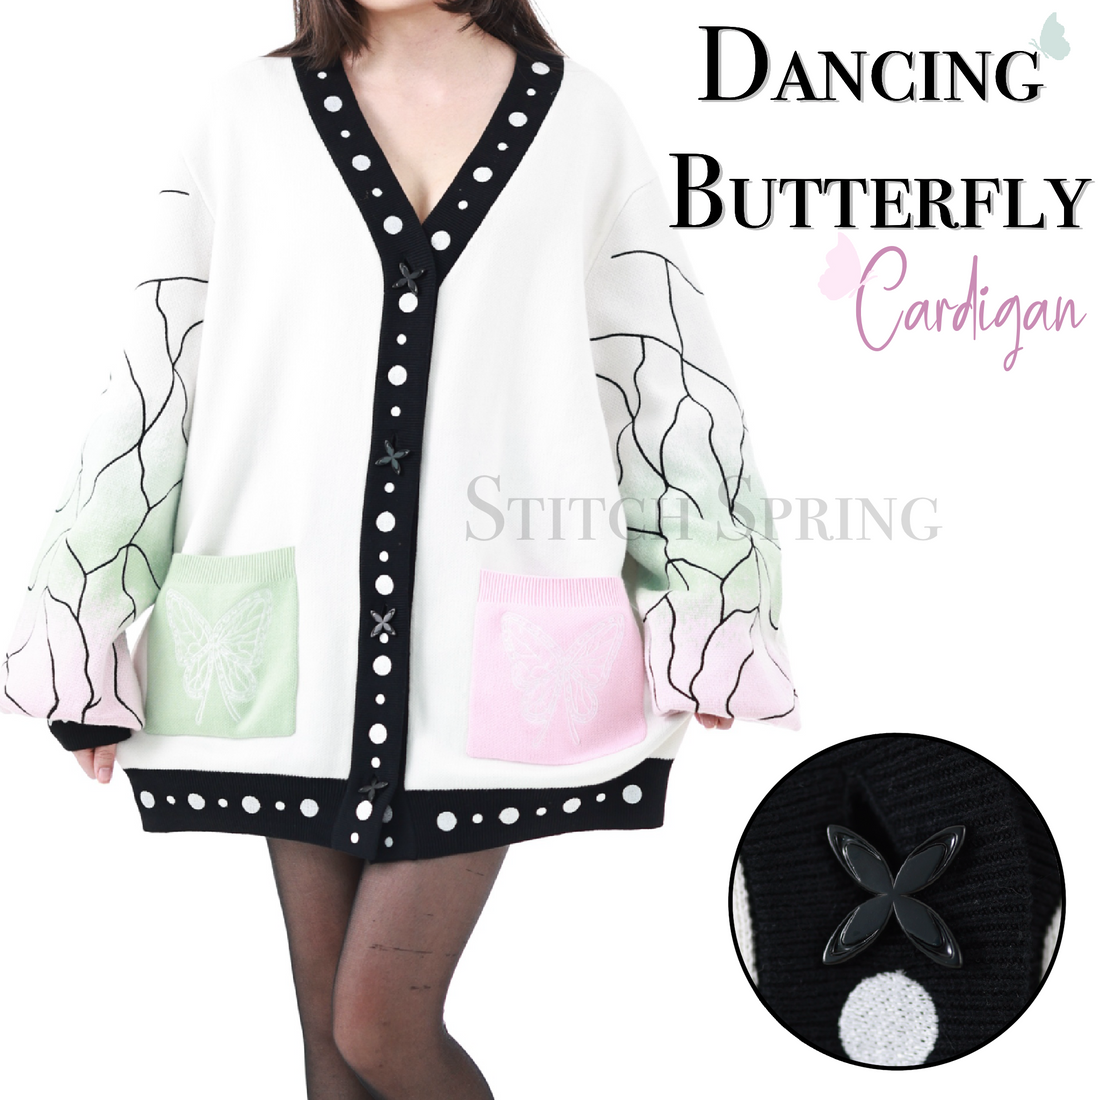 Dancing Butterfly Cardigan Preorder